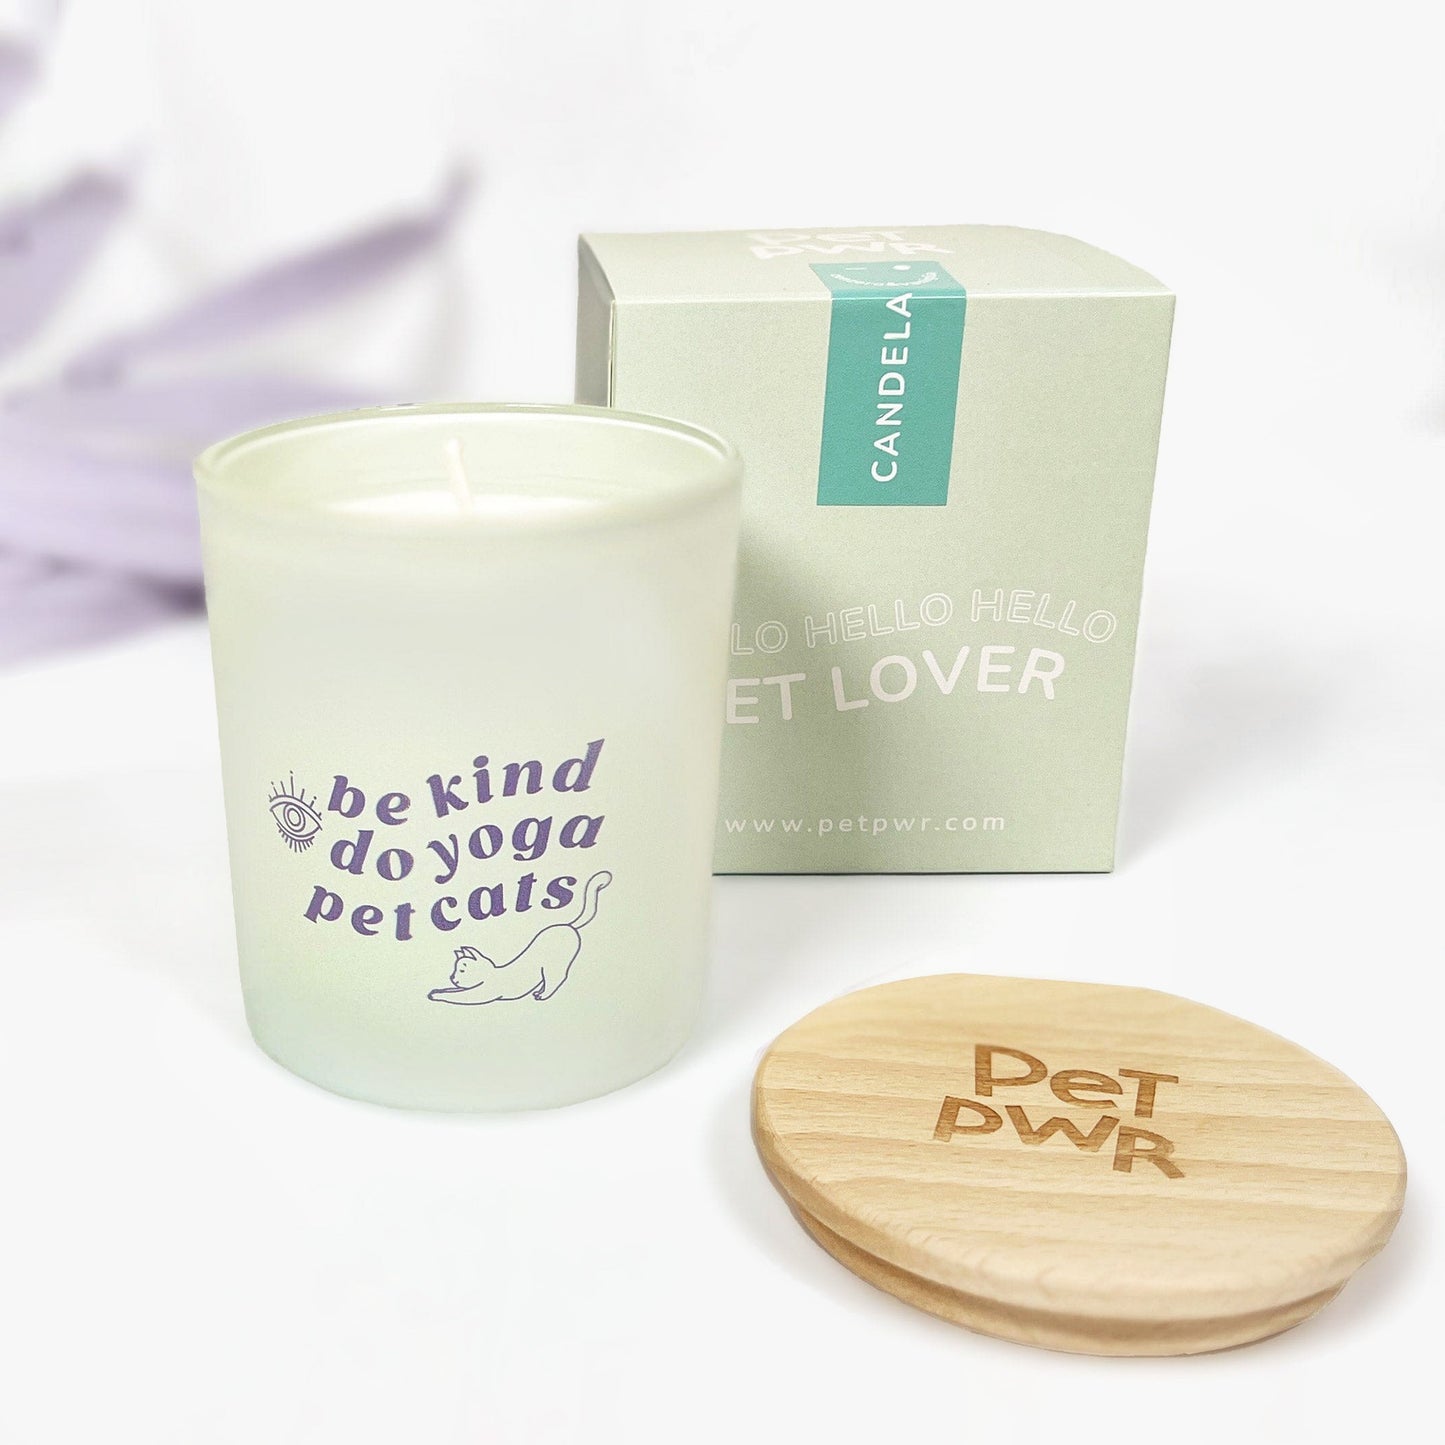 Soy Wax Candle with Essential Oils - Be kind, do yoga, pet cats